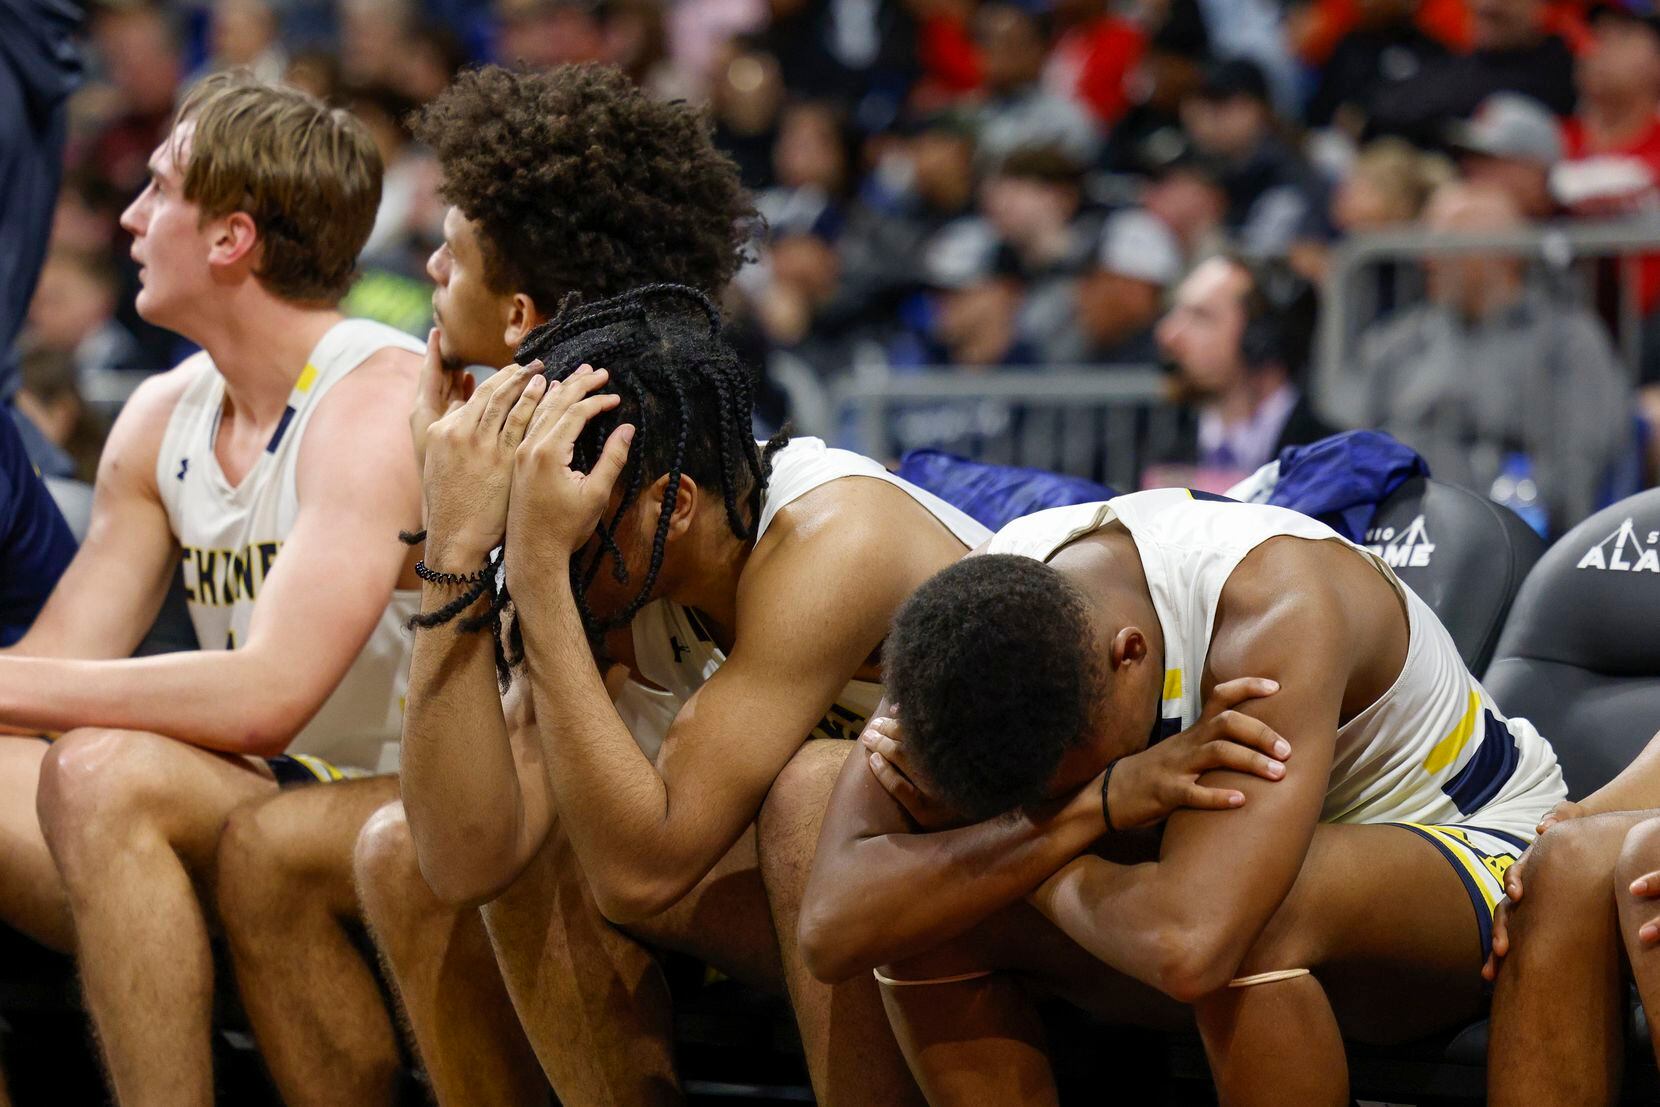 McKinney players react after a turnover during the third quarter of the Class 6A state...